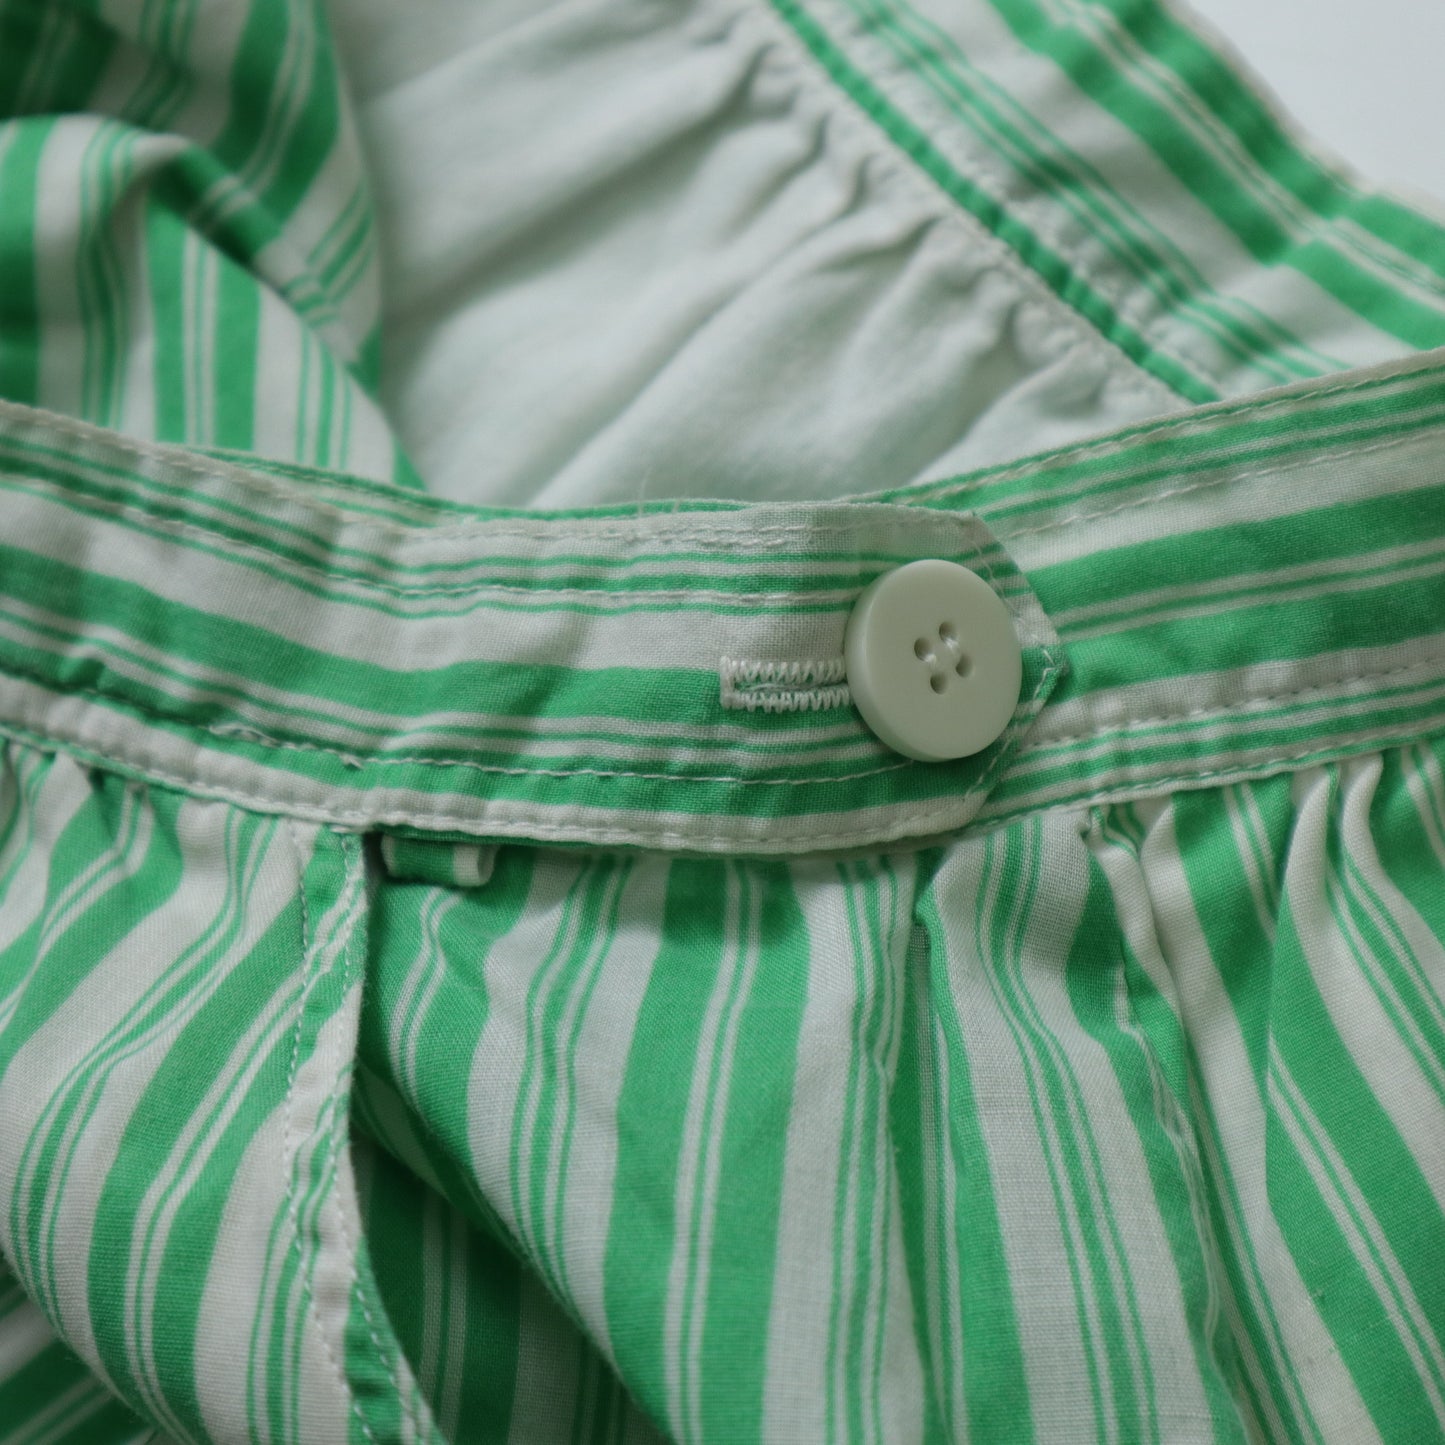 1970s American made green and white striped skirt ILGWU/Union made